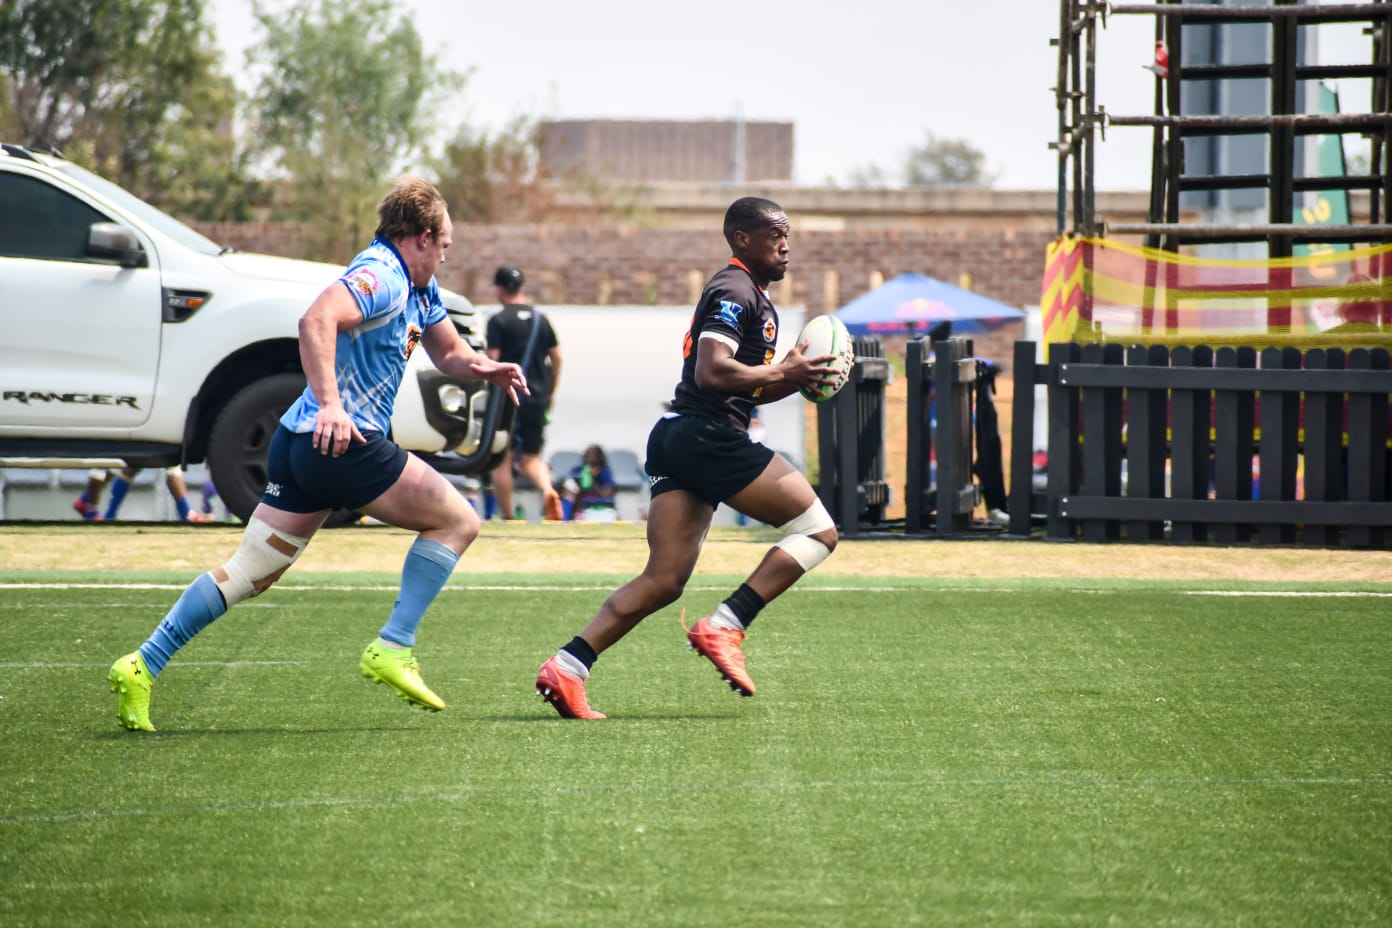 USSA Rugby 7s tournament in Kimberly, 24 and 25 September 2022.